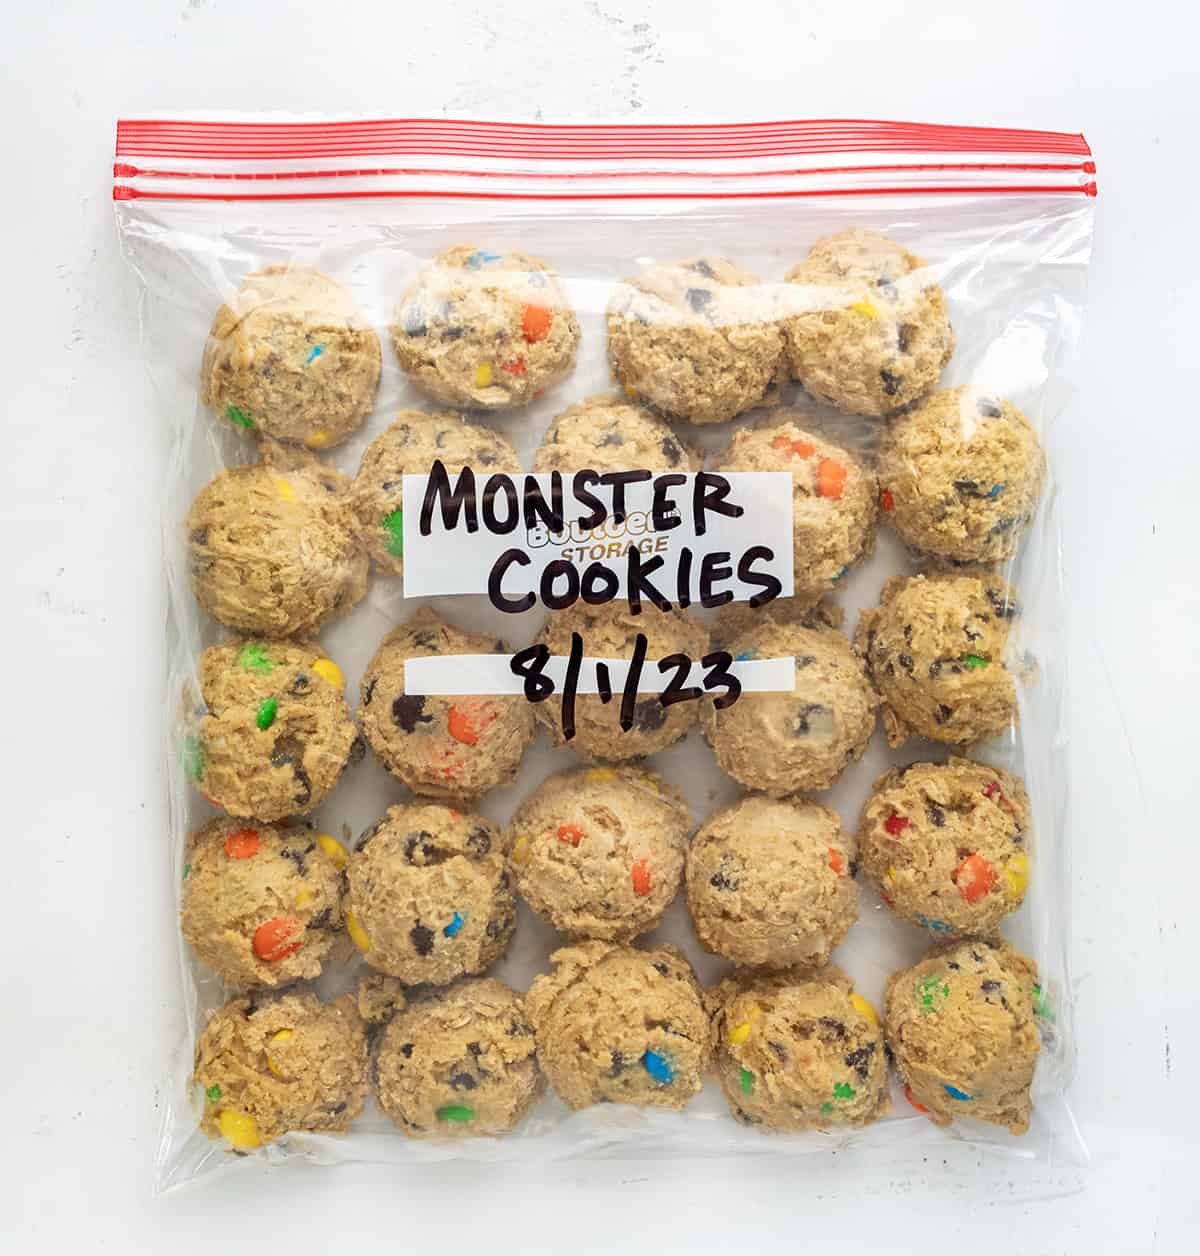 Guide To Freezing, Baking, and Storing Cookies - i am baker